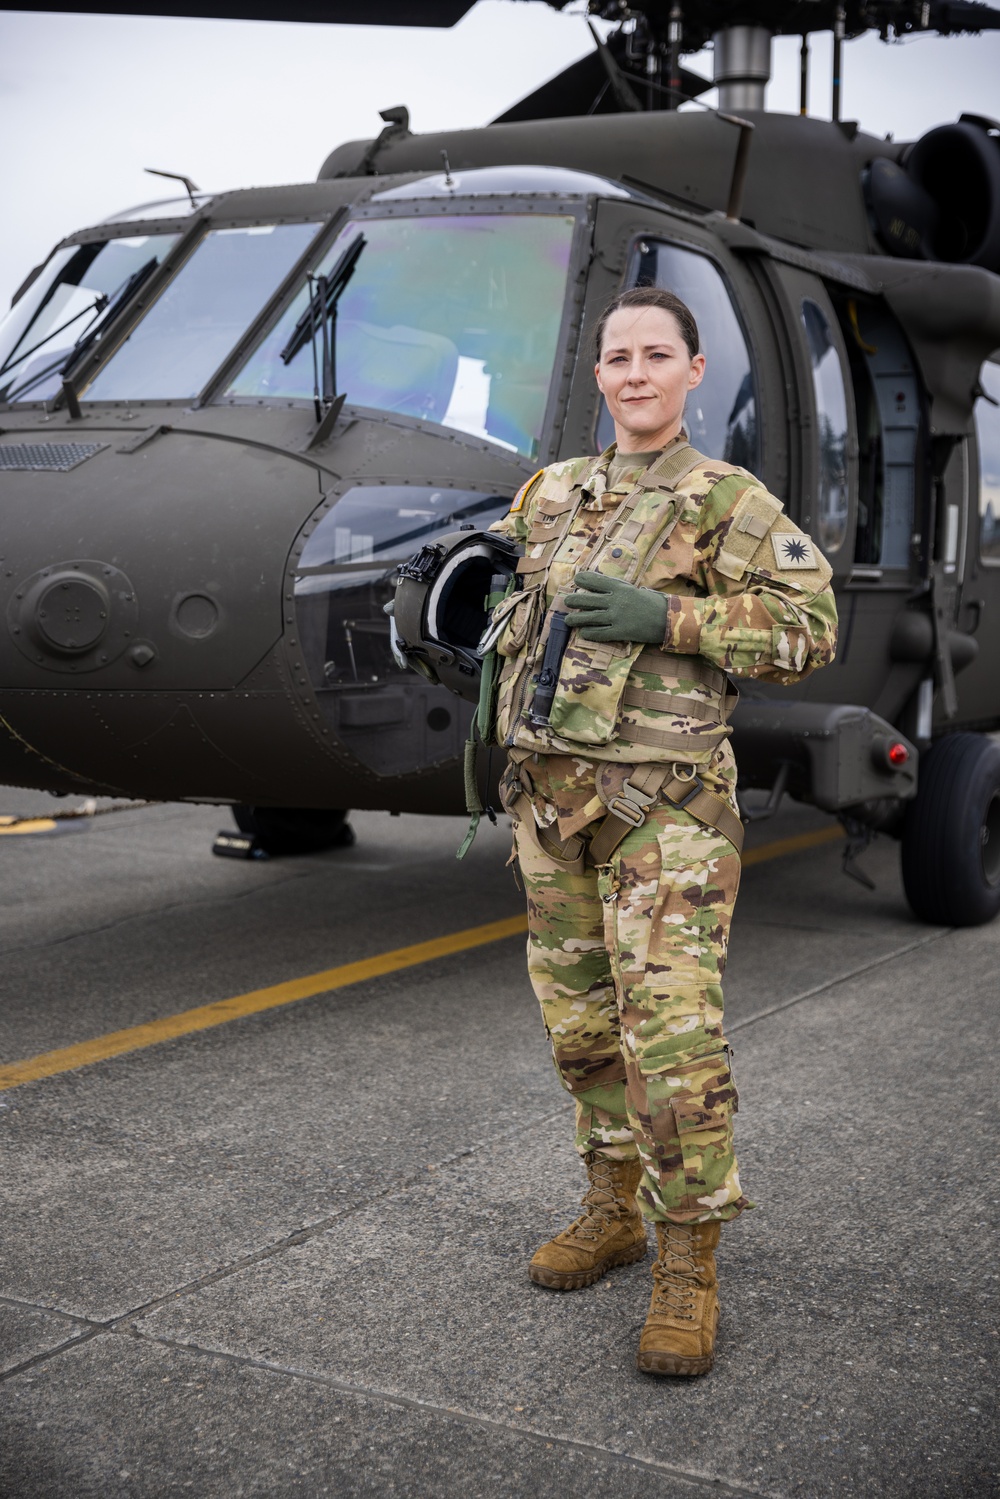 Seizing her opportunity: National Guard pilot fulfills dream to fly